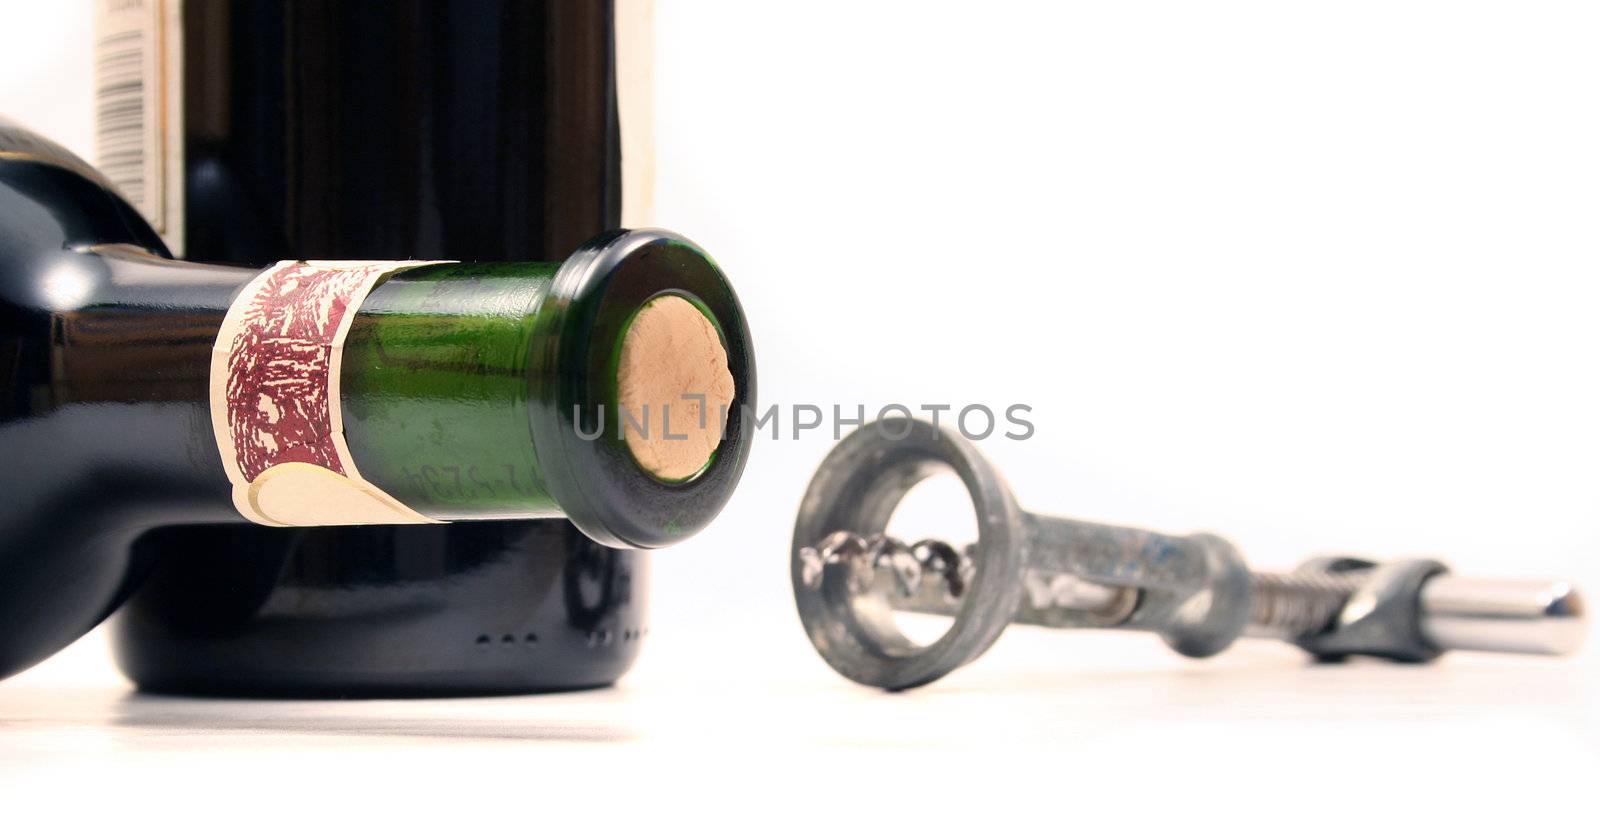 A bottleneck laying next to a bottle opener. All isolated on white background.